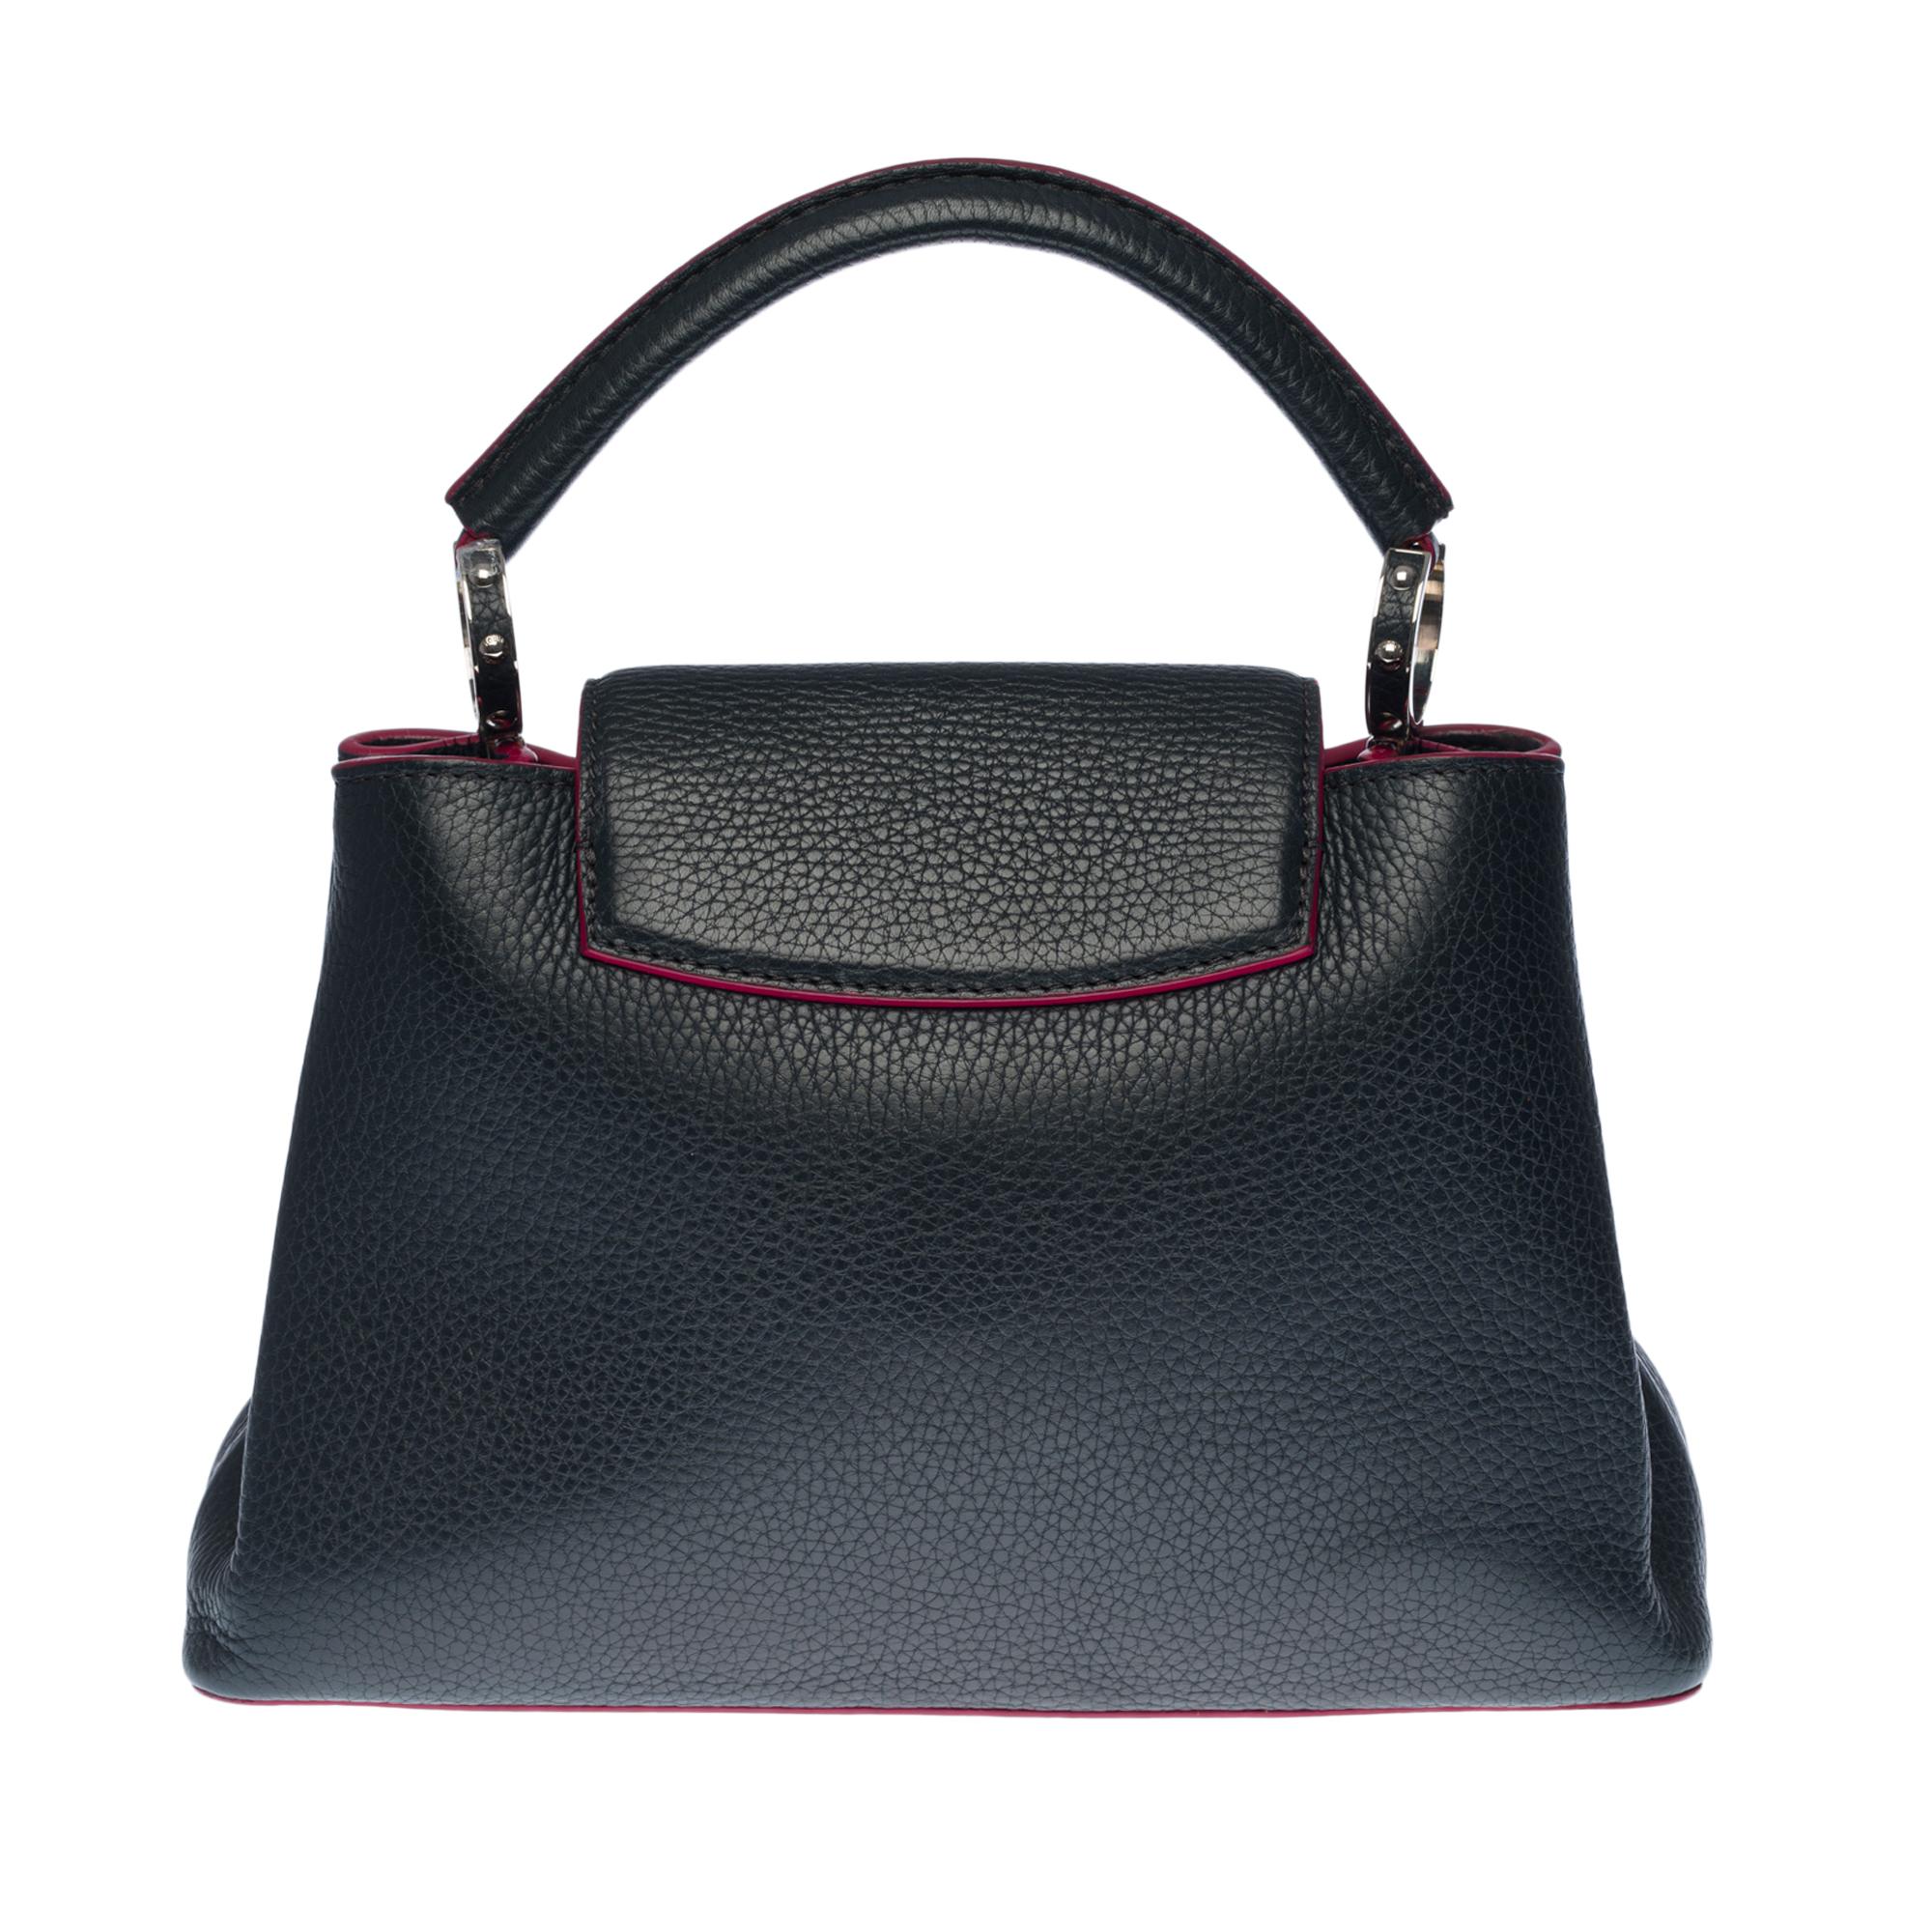 This Louis Vuitton Capucines BB two-tone limited edition bag is made of navy blue Taurillon leather with red sliced edges, silver metal hardware. The upper handle is in navy blue Taurillon leather

Details
27 x 18 x 9 cm - 10.62 * 7.08 * 3.54